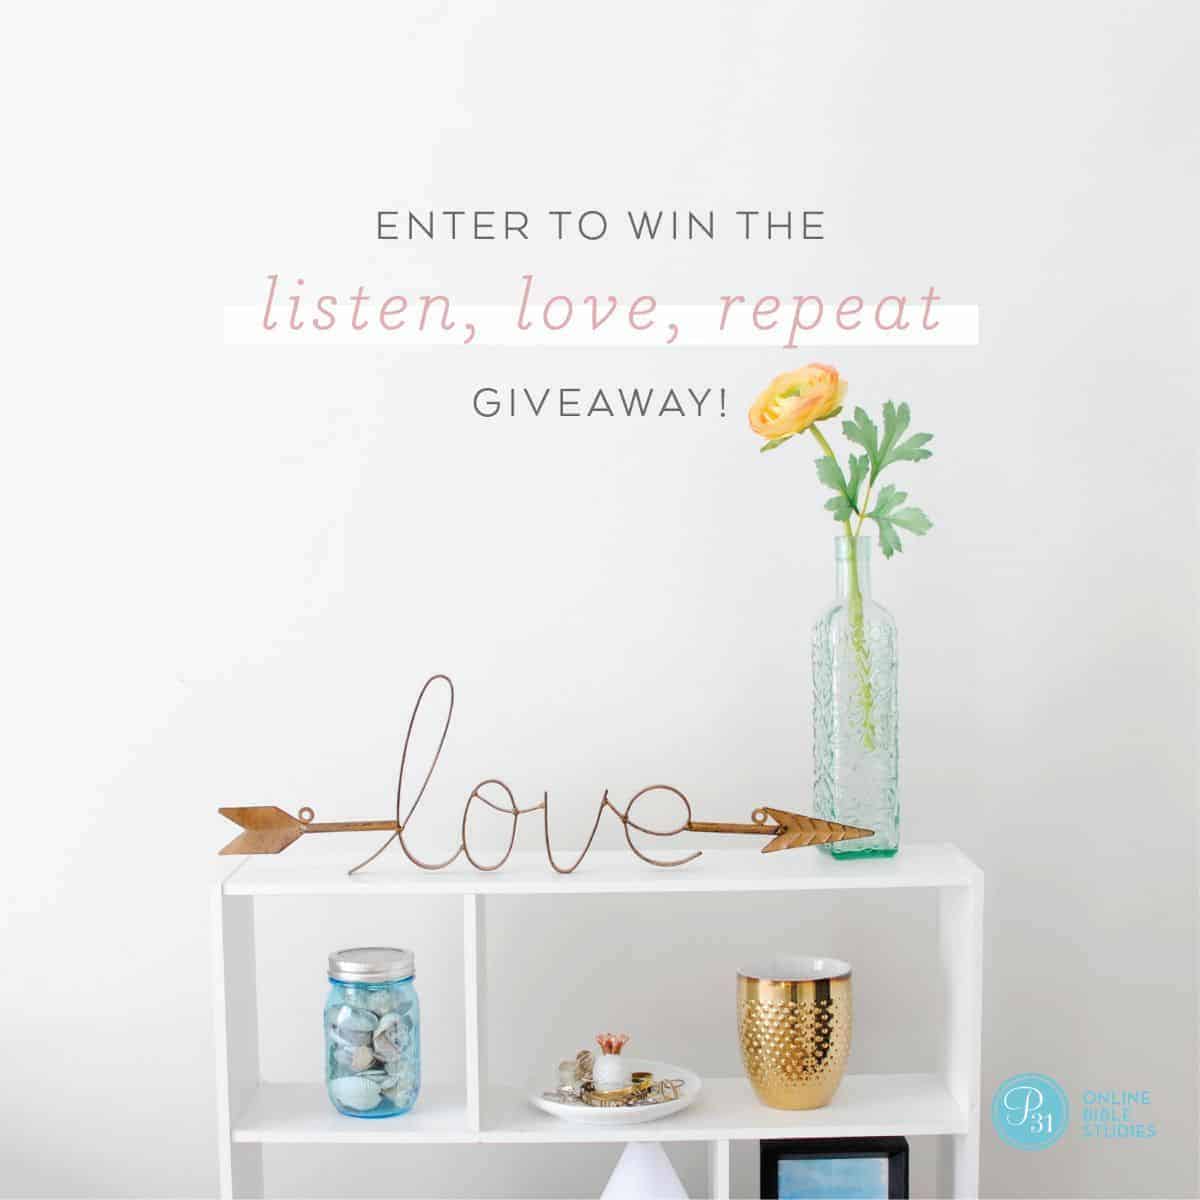 Four Ways to Love Your Nearest & Dearest + A Giveaway